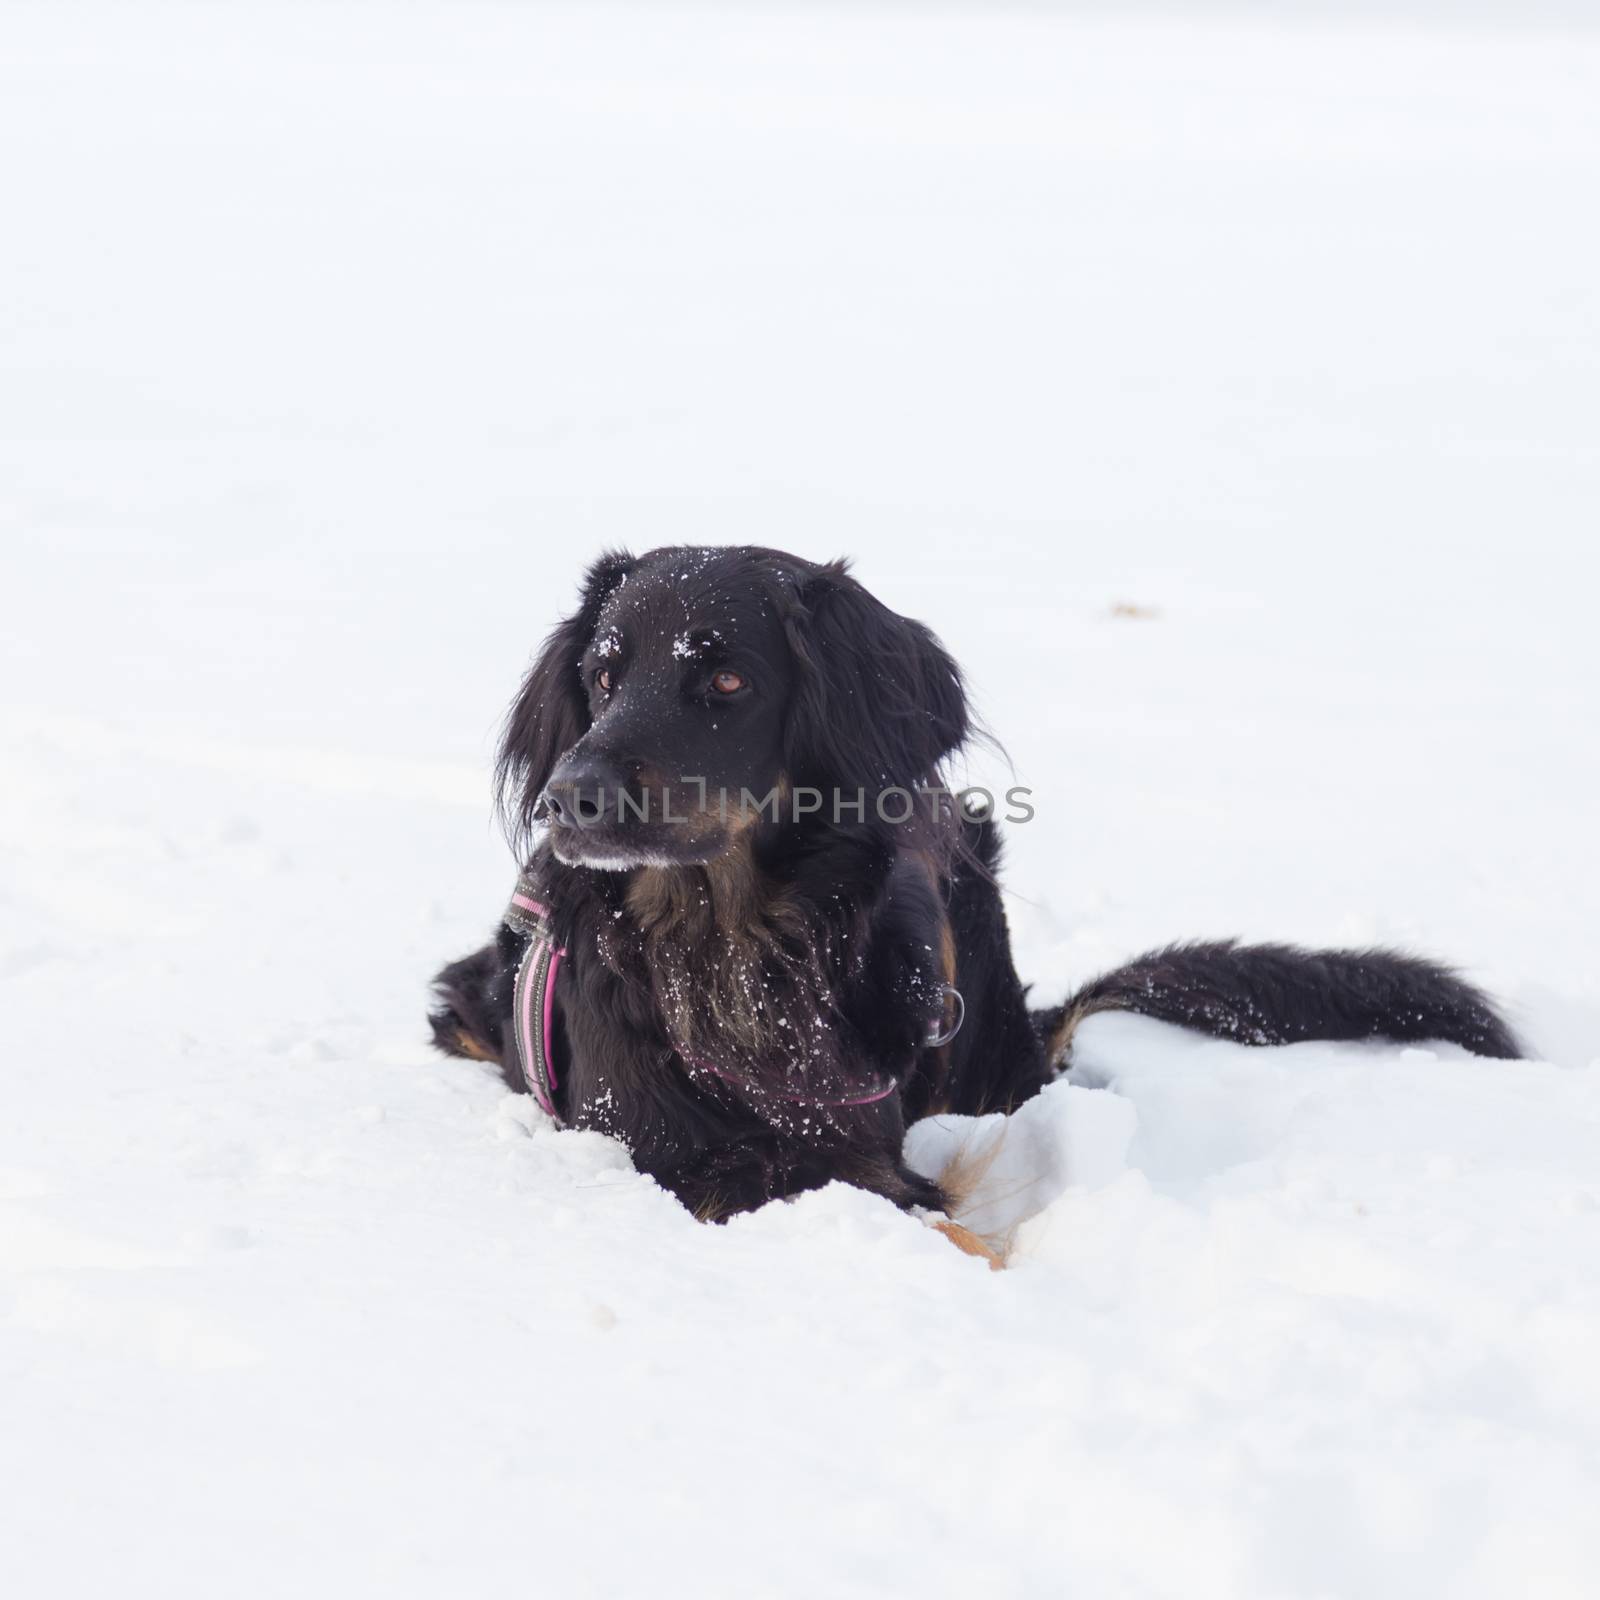 A beautiful dark brown dog playing outside in cold winter snow